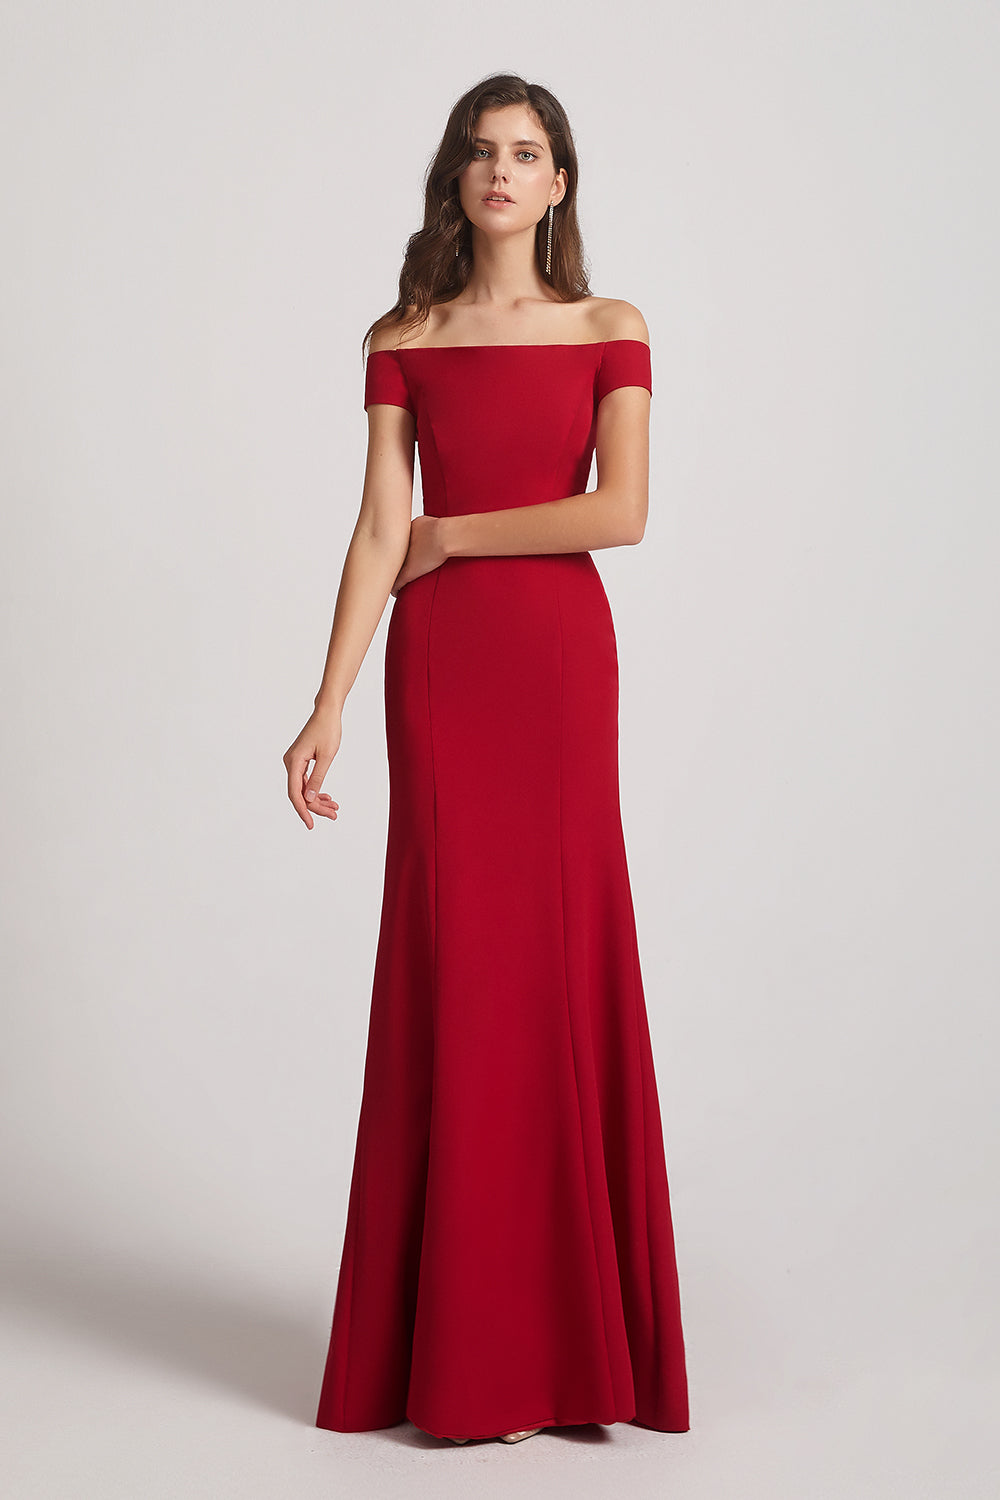 Dark Red Off The Shoulder Trumpet Style Bridesmaid Dresses